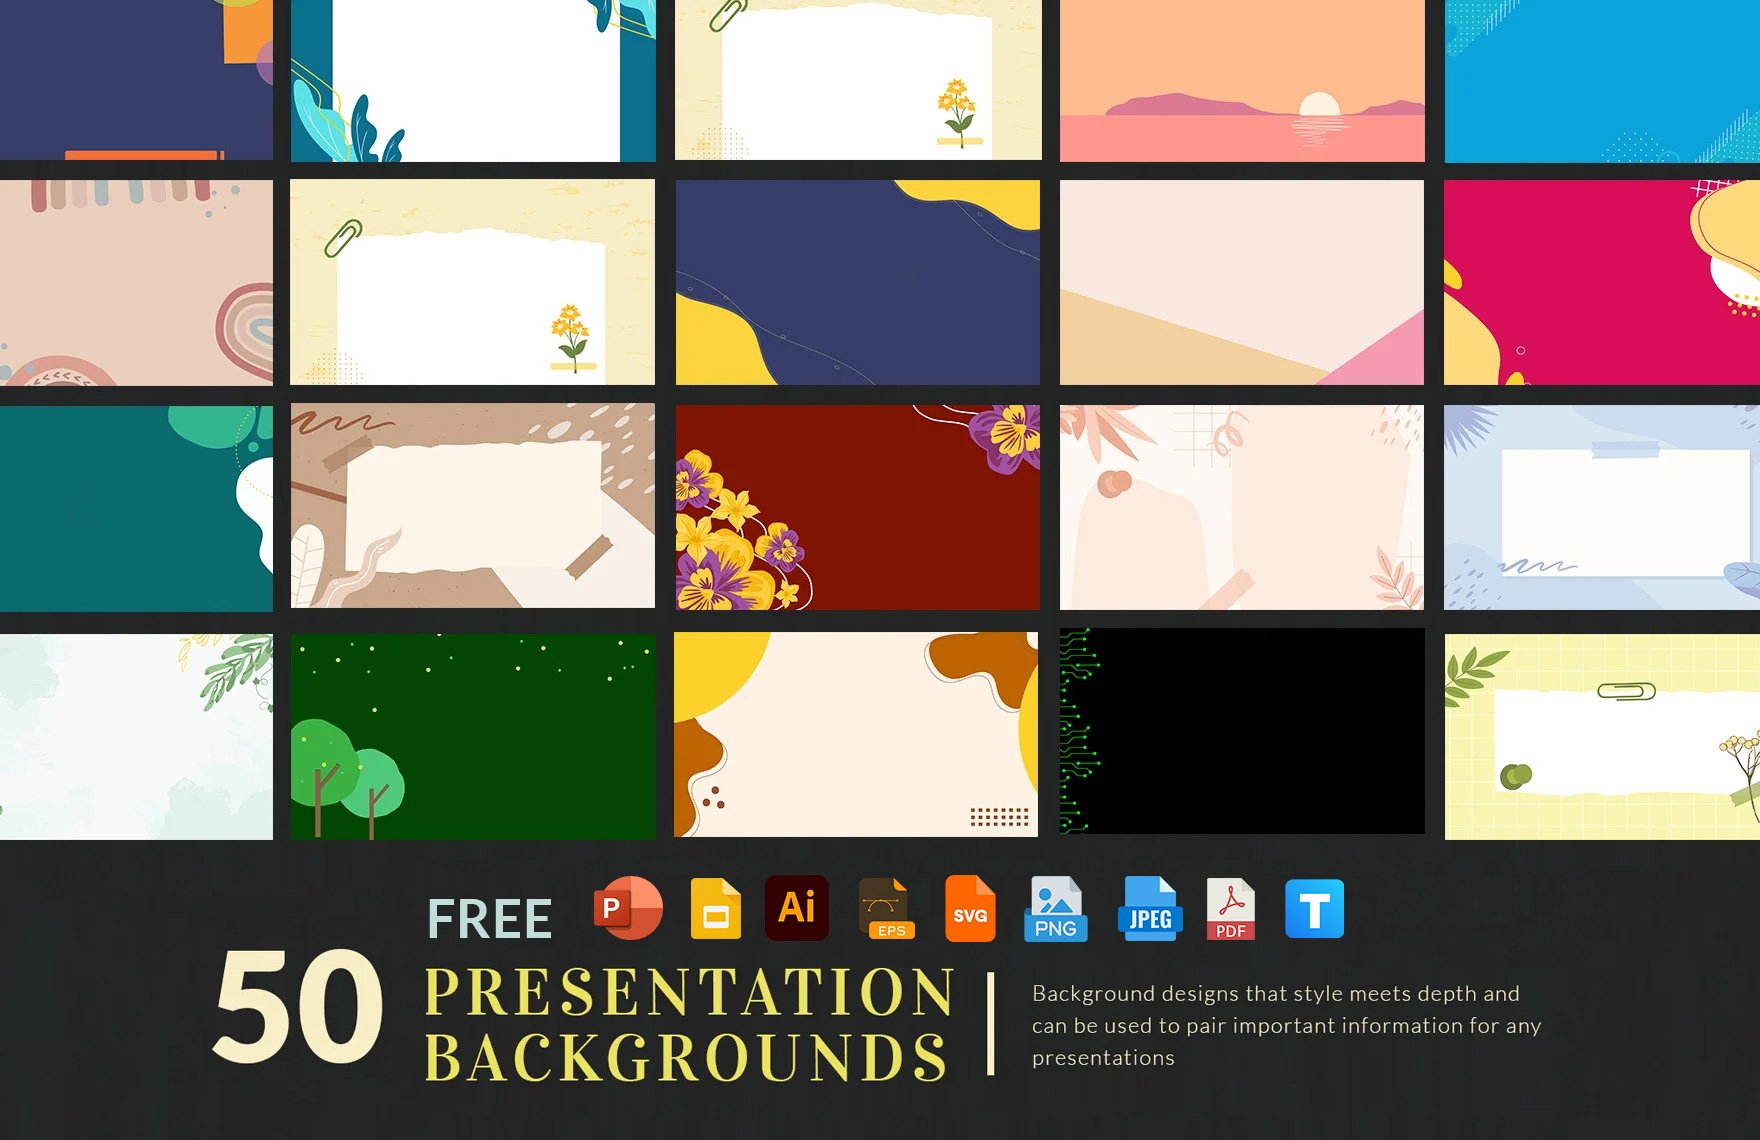 Free Backgrounds Template